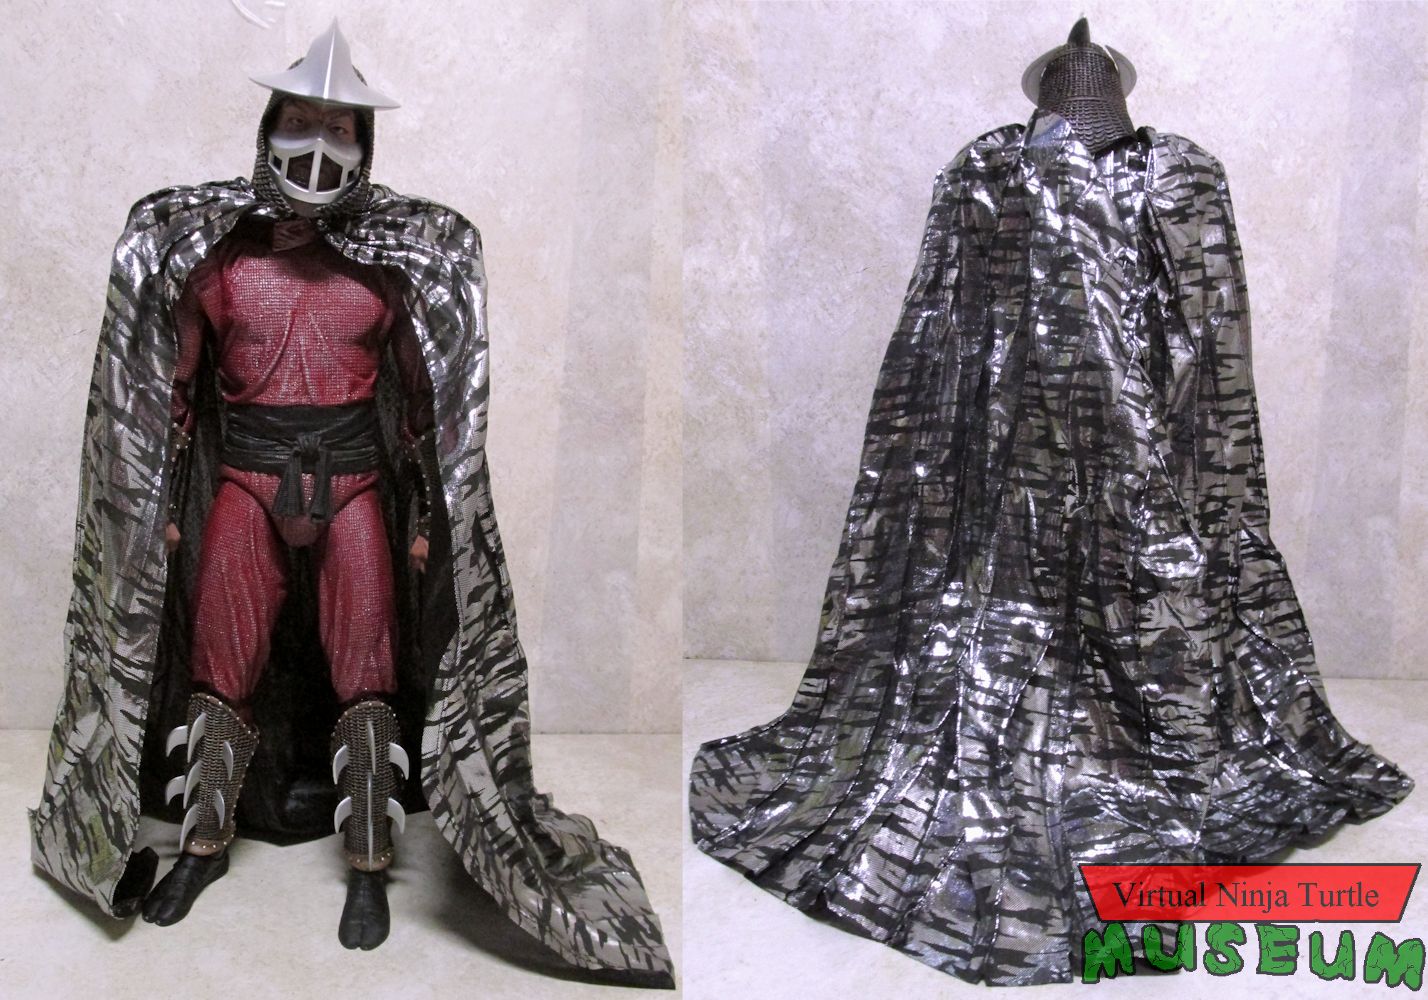 Shredder with cape front and back